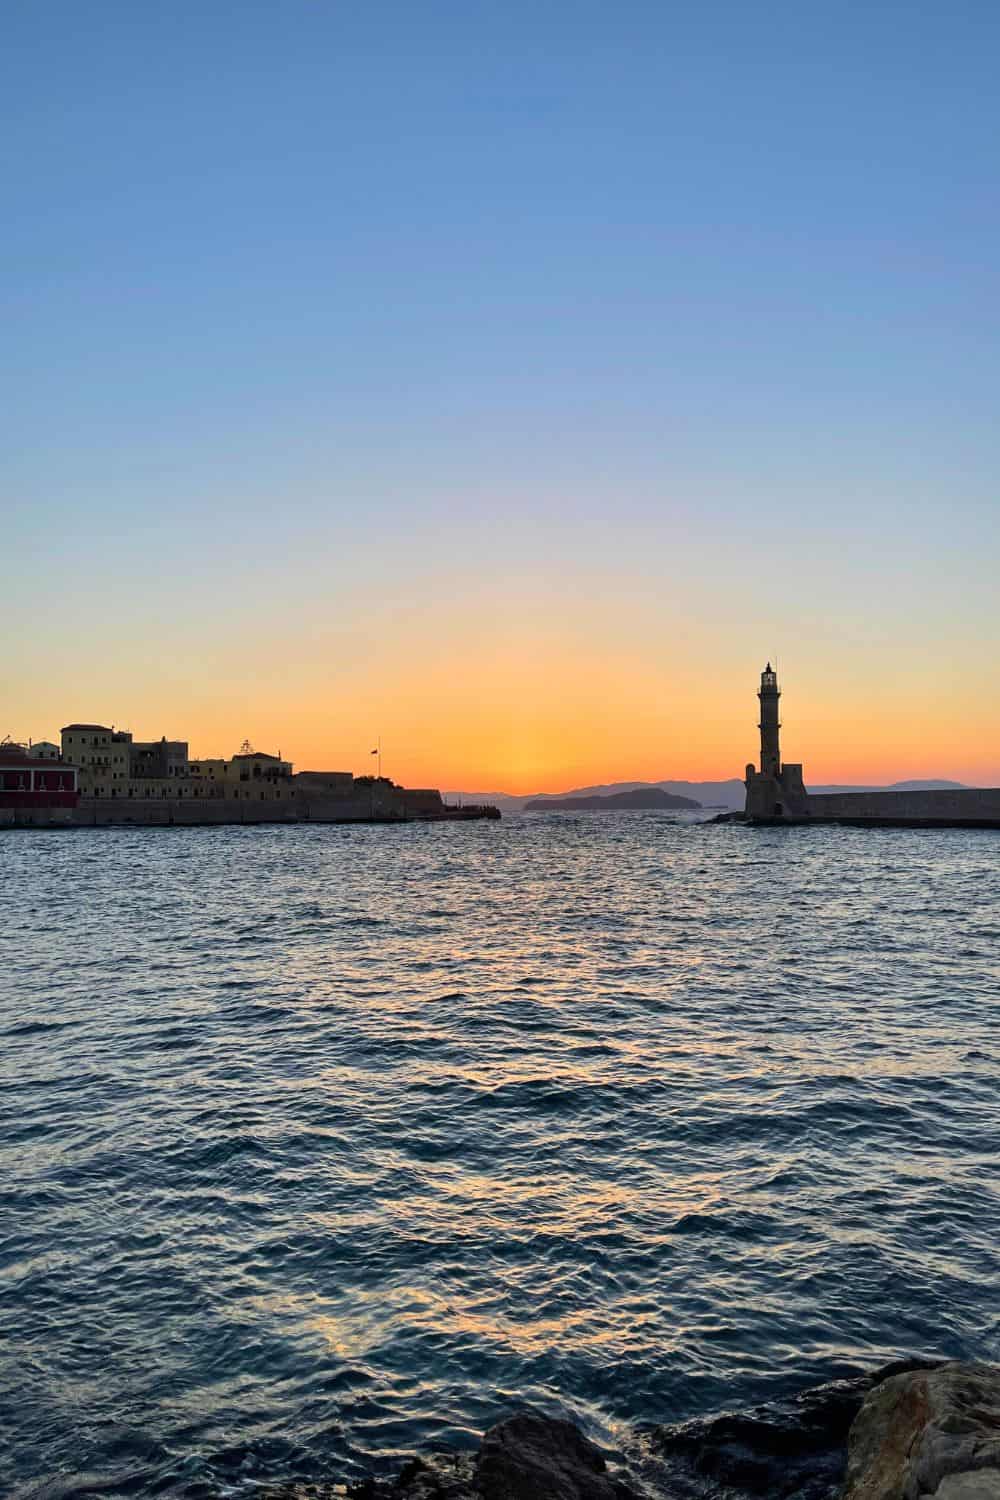 Sunset view of Chania's old Venetian harbor with the iconic lighthouse against a gradient orange sky, reflecting on the Aegean Sea.